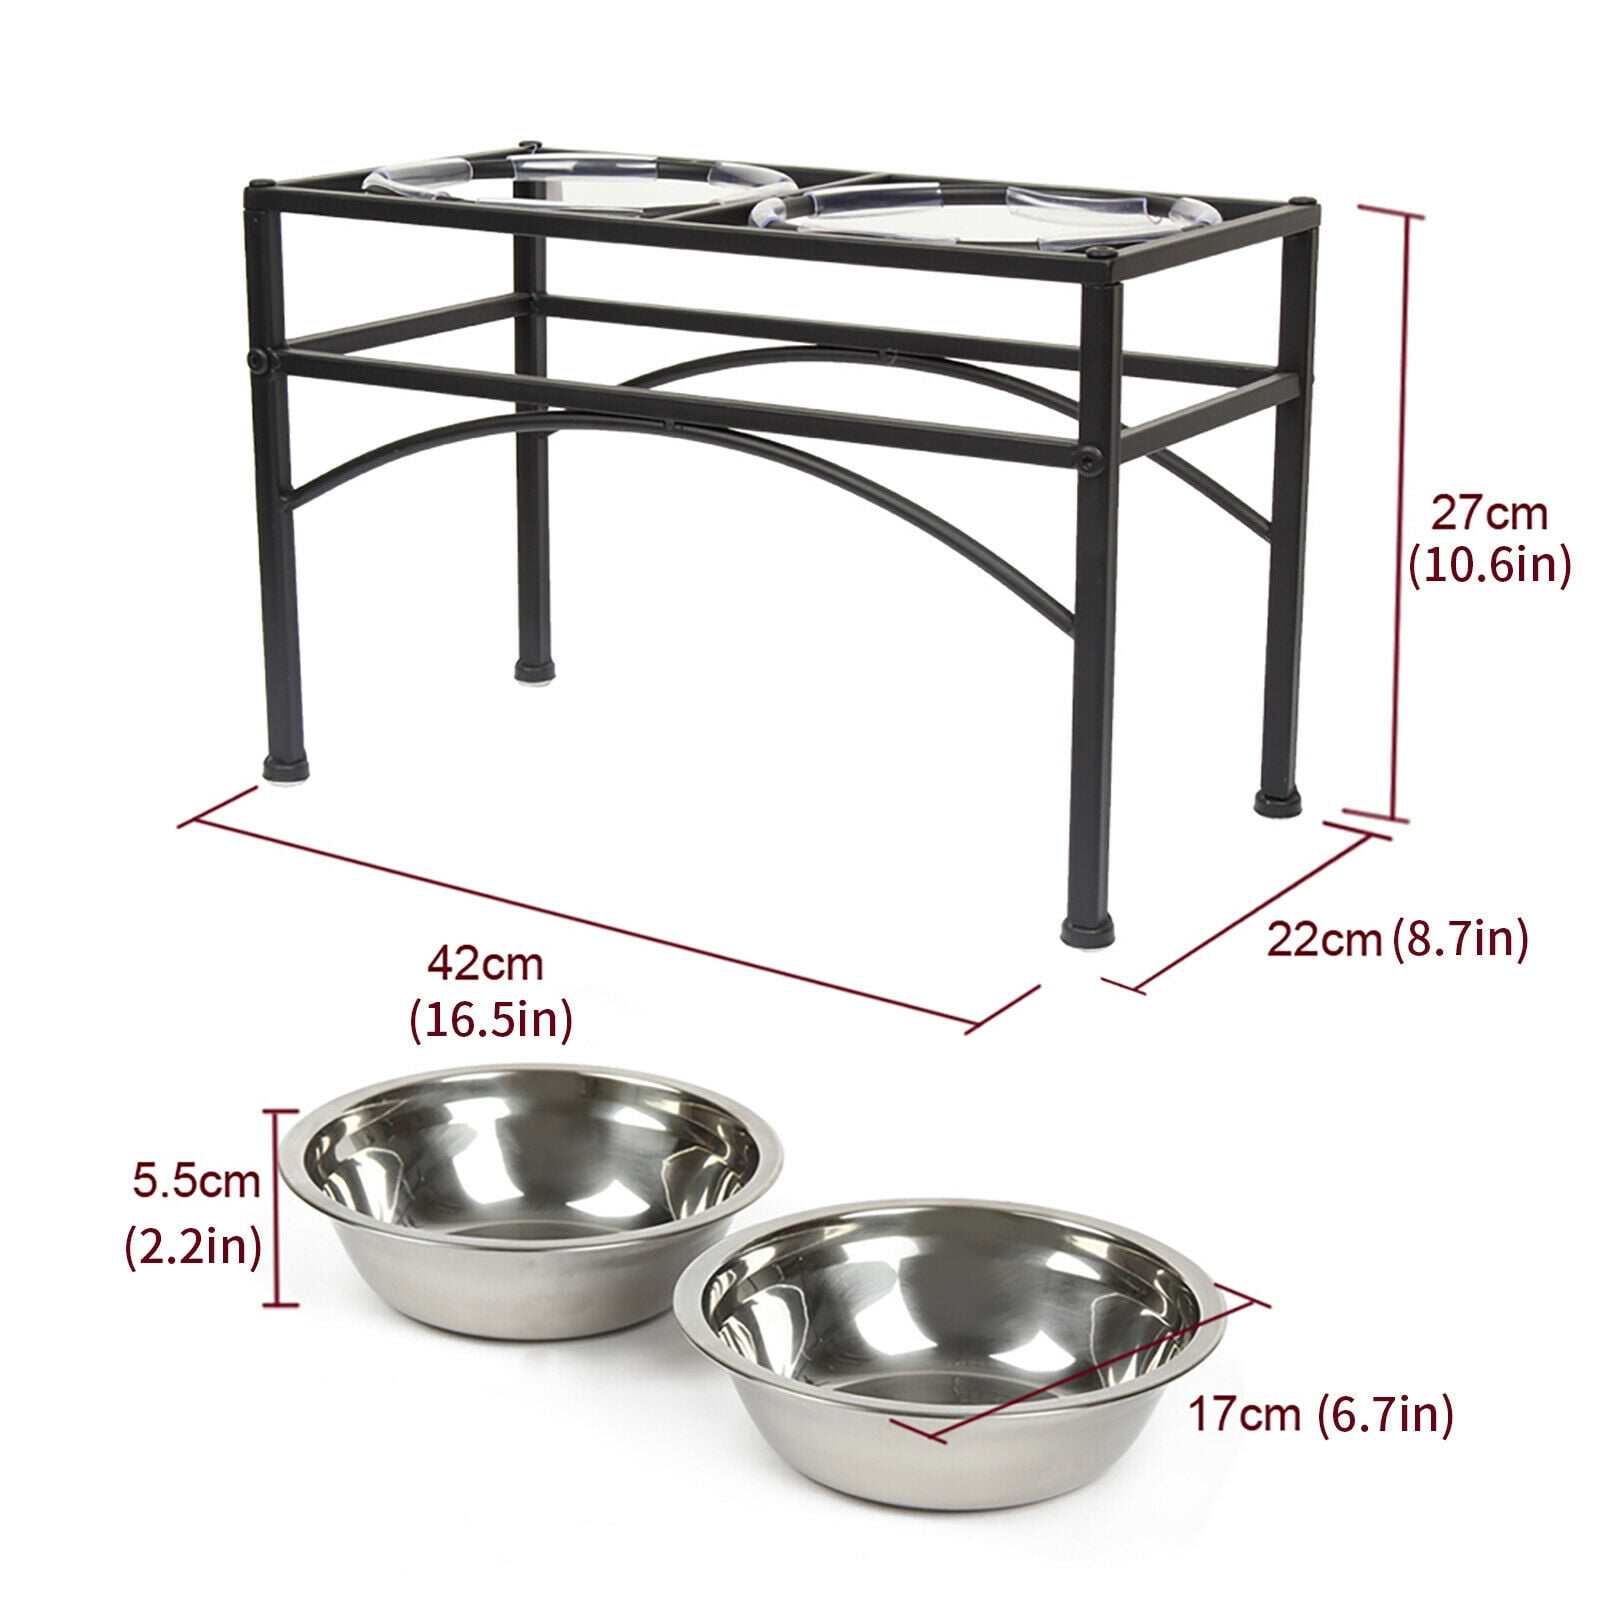 Feoyoho Acrylic Elevated Dog Cat Bowls Pet Feeder Double Bowl Raised Stand Comes with 4 Removable Stainless Steel Bowls. Perfect for Cats Puppies